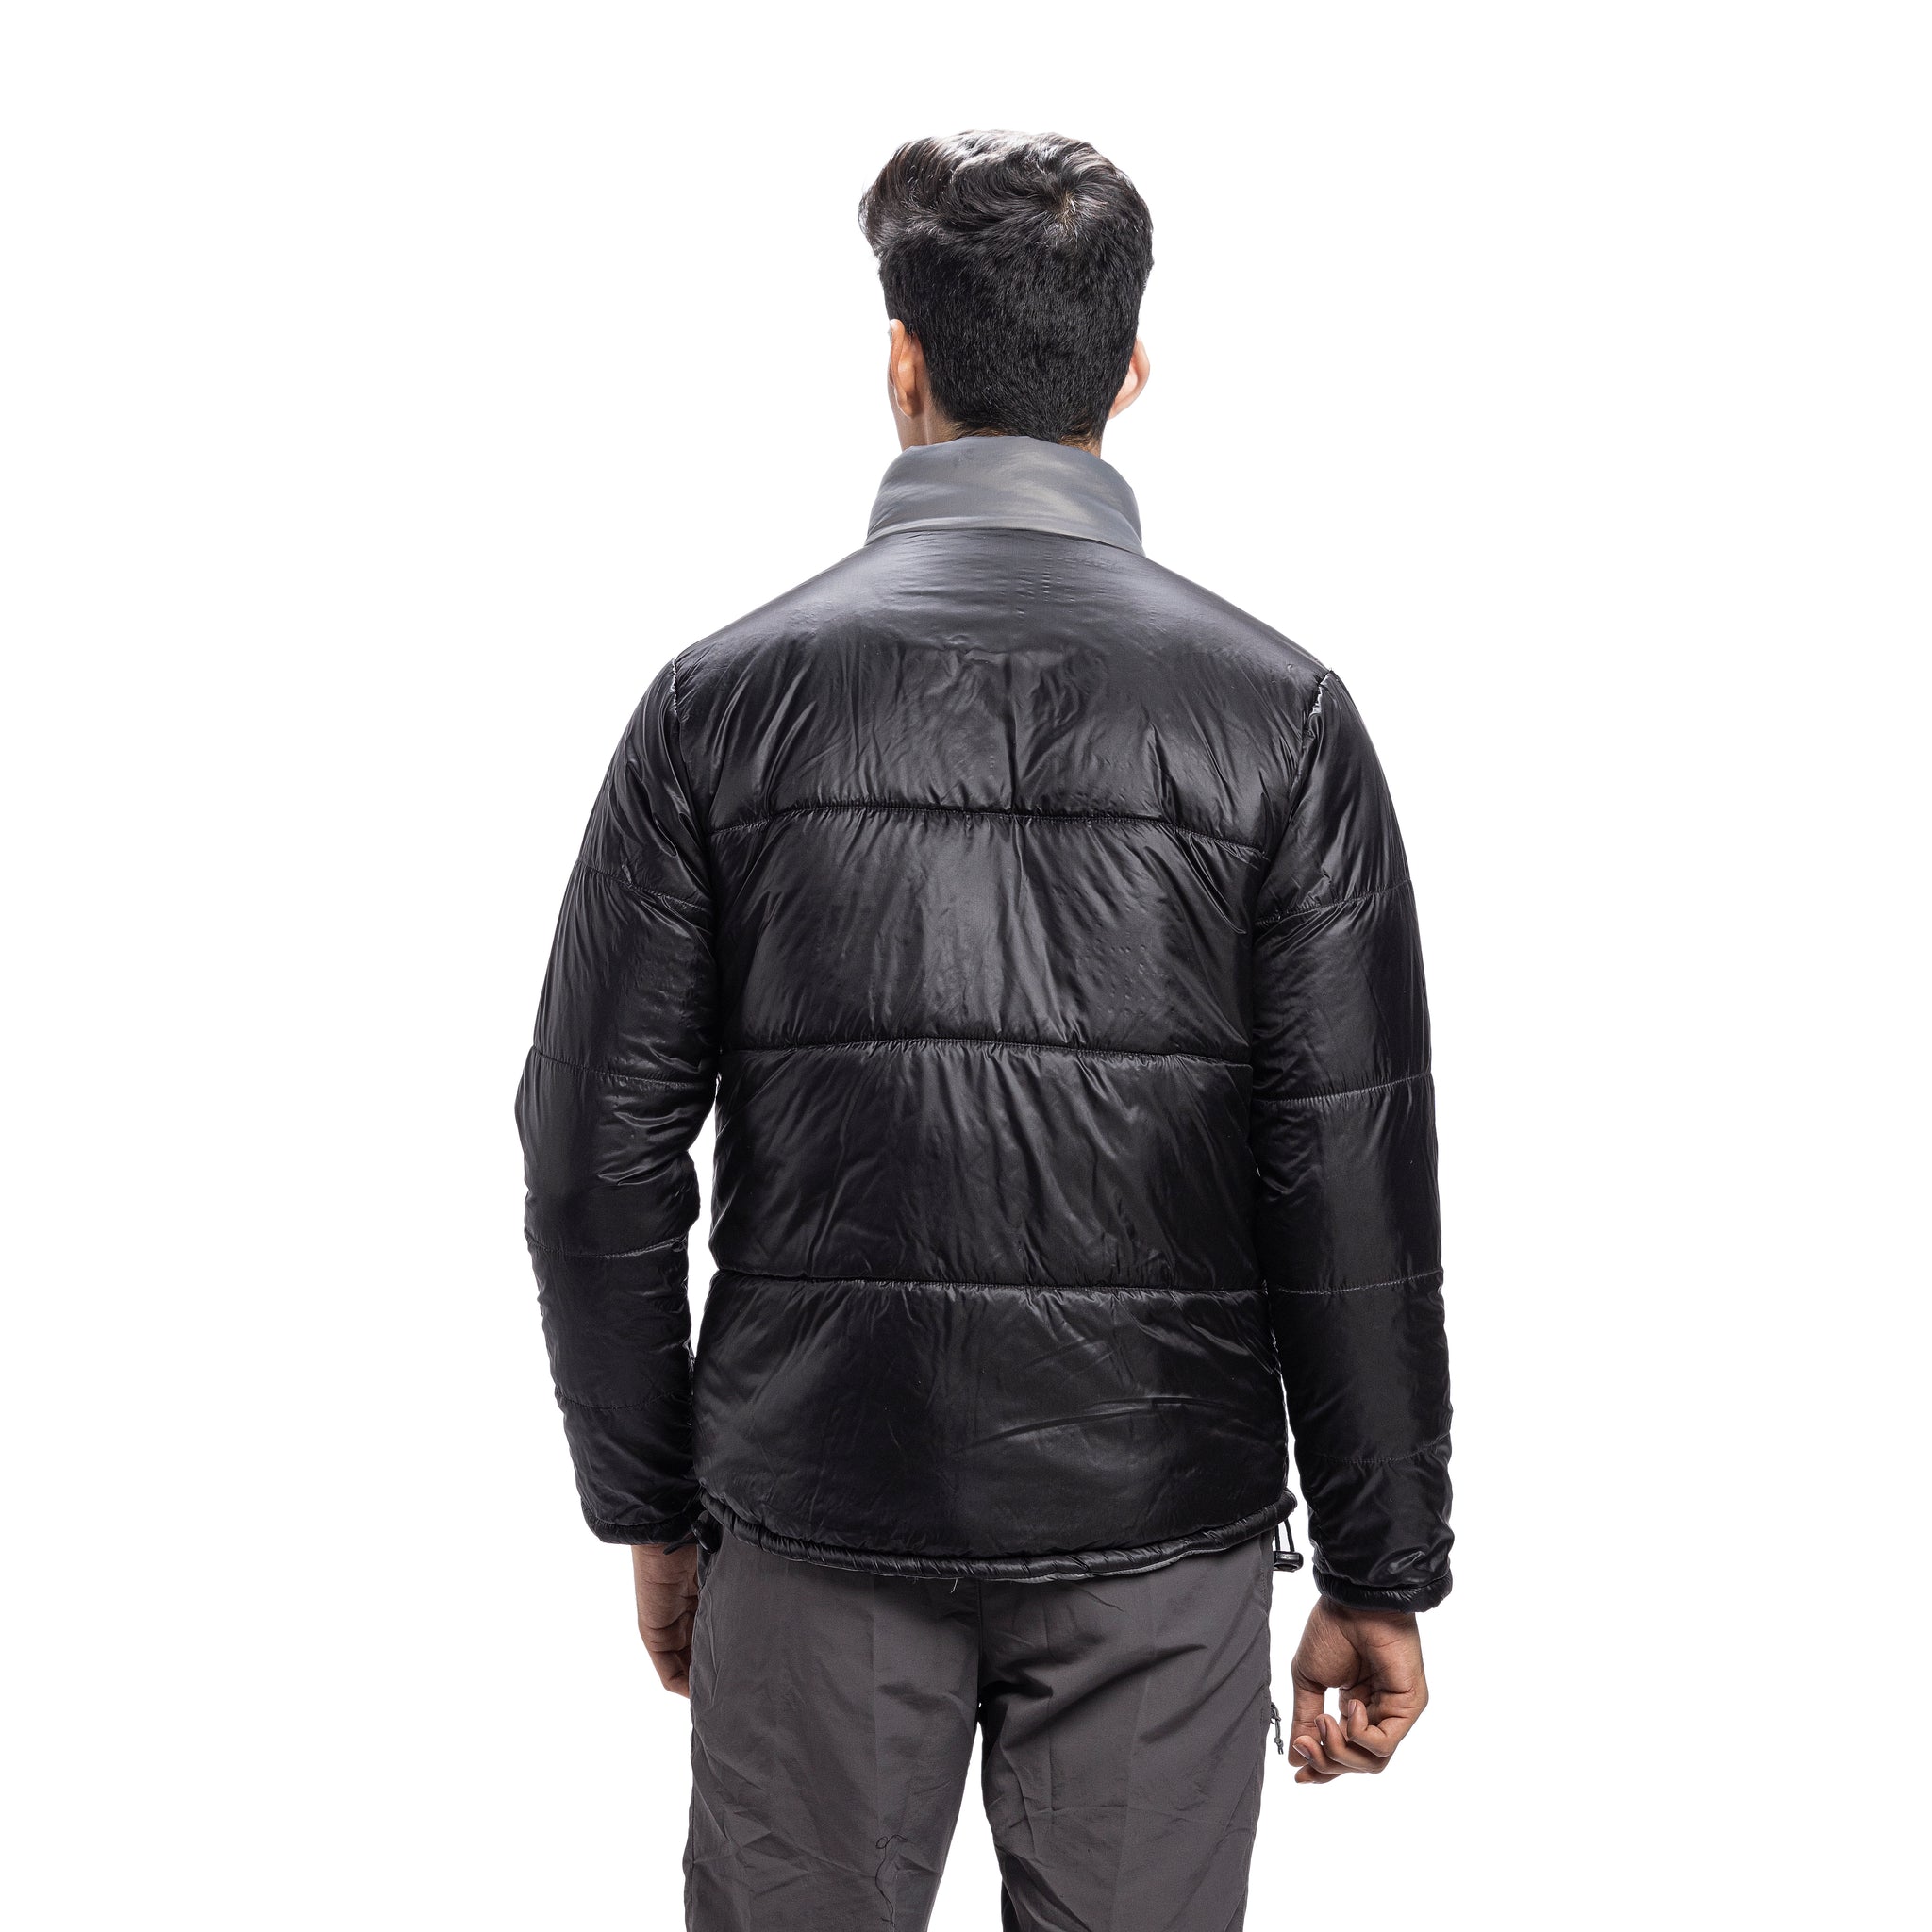 Are Leather Jackets Good for Winter: Fact or Fiction? – Lusso Leather